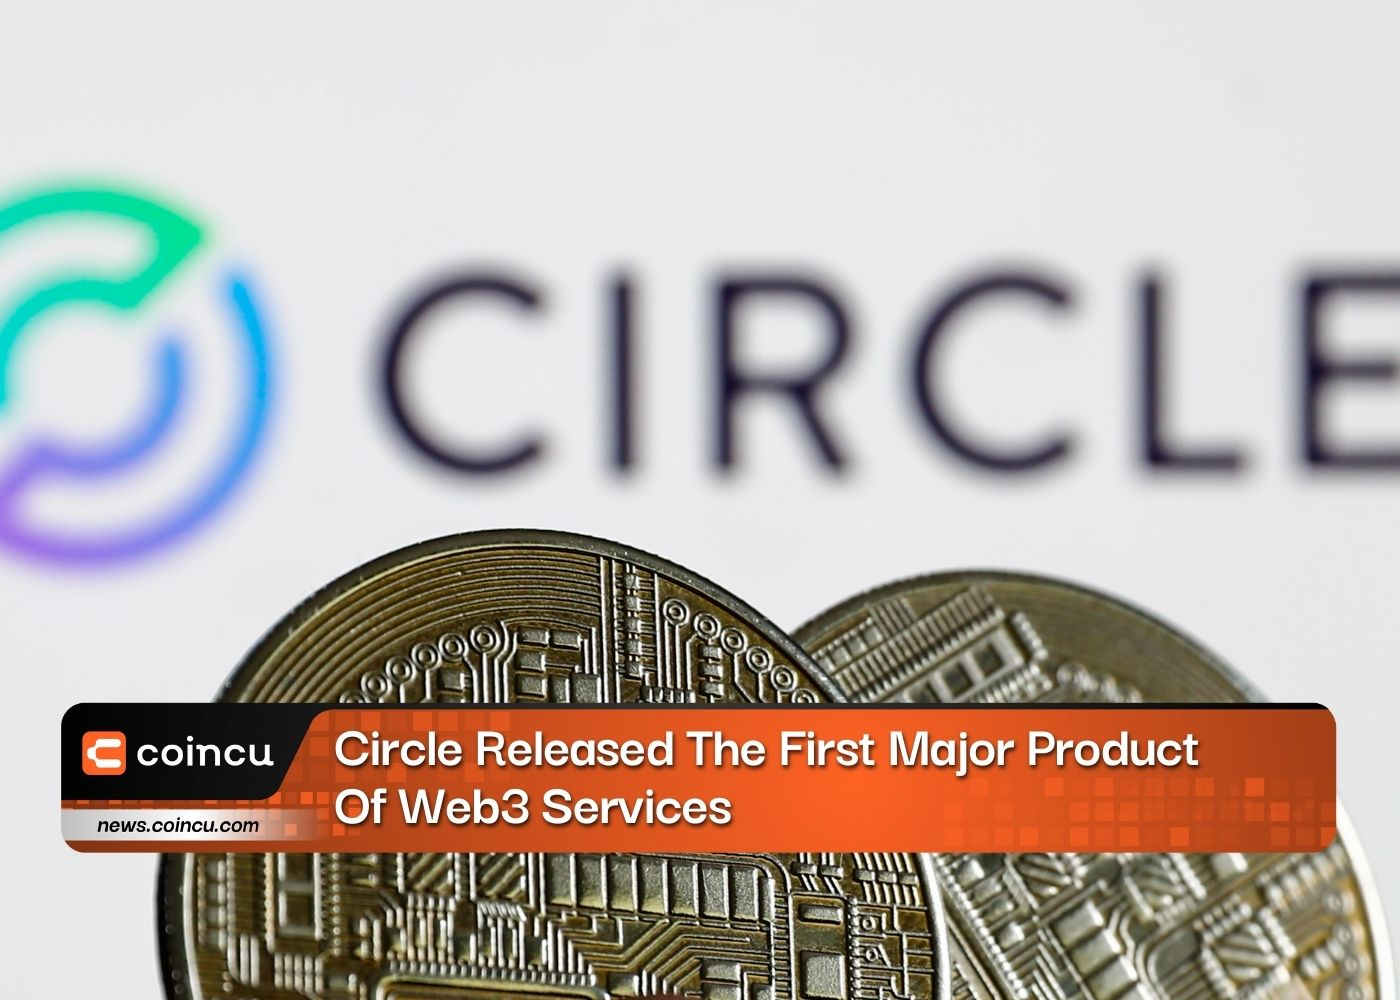 Circle Released The First Major Product Of Web3 Services